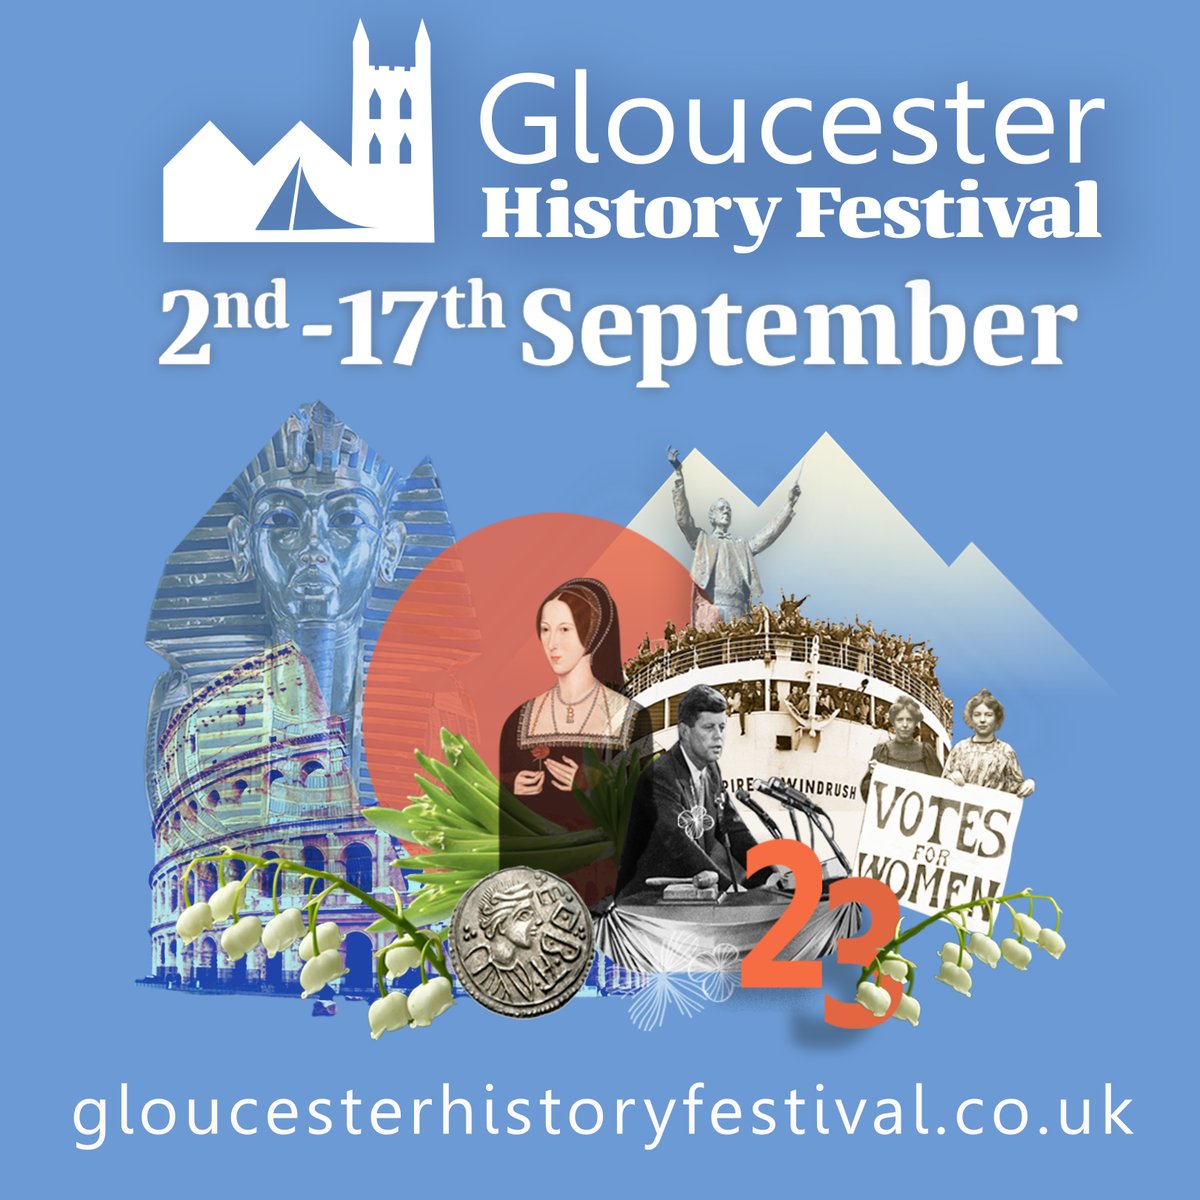 The Autumn #GlosHistFest23 Festival is here! With over 150 events, there's something for everyone.

Highlights include
Former Prime Minister Theresa May 
Former Led Zeppelin frontman Robert Plant
A House Through Time presenter David Olusoga

Find out more: gloucesterhistoryfestival.co.uk/autumn-2023/